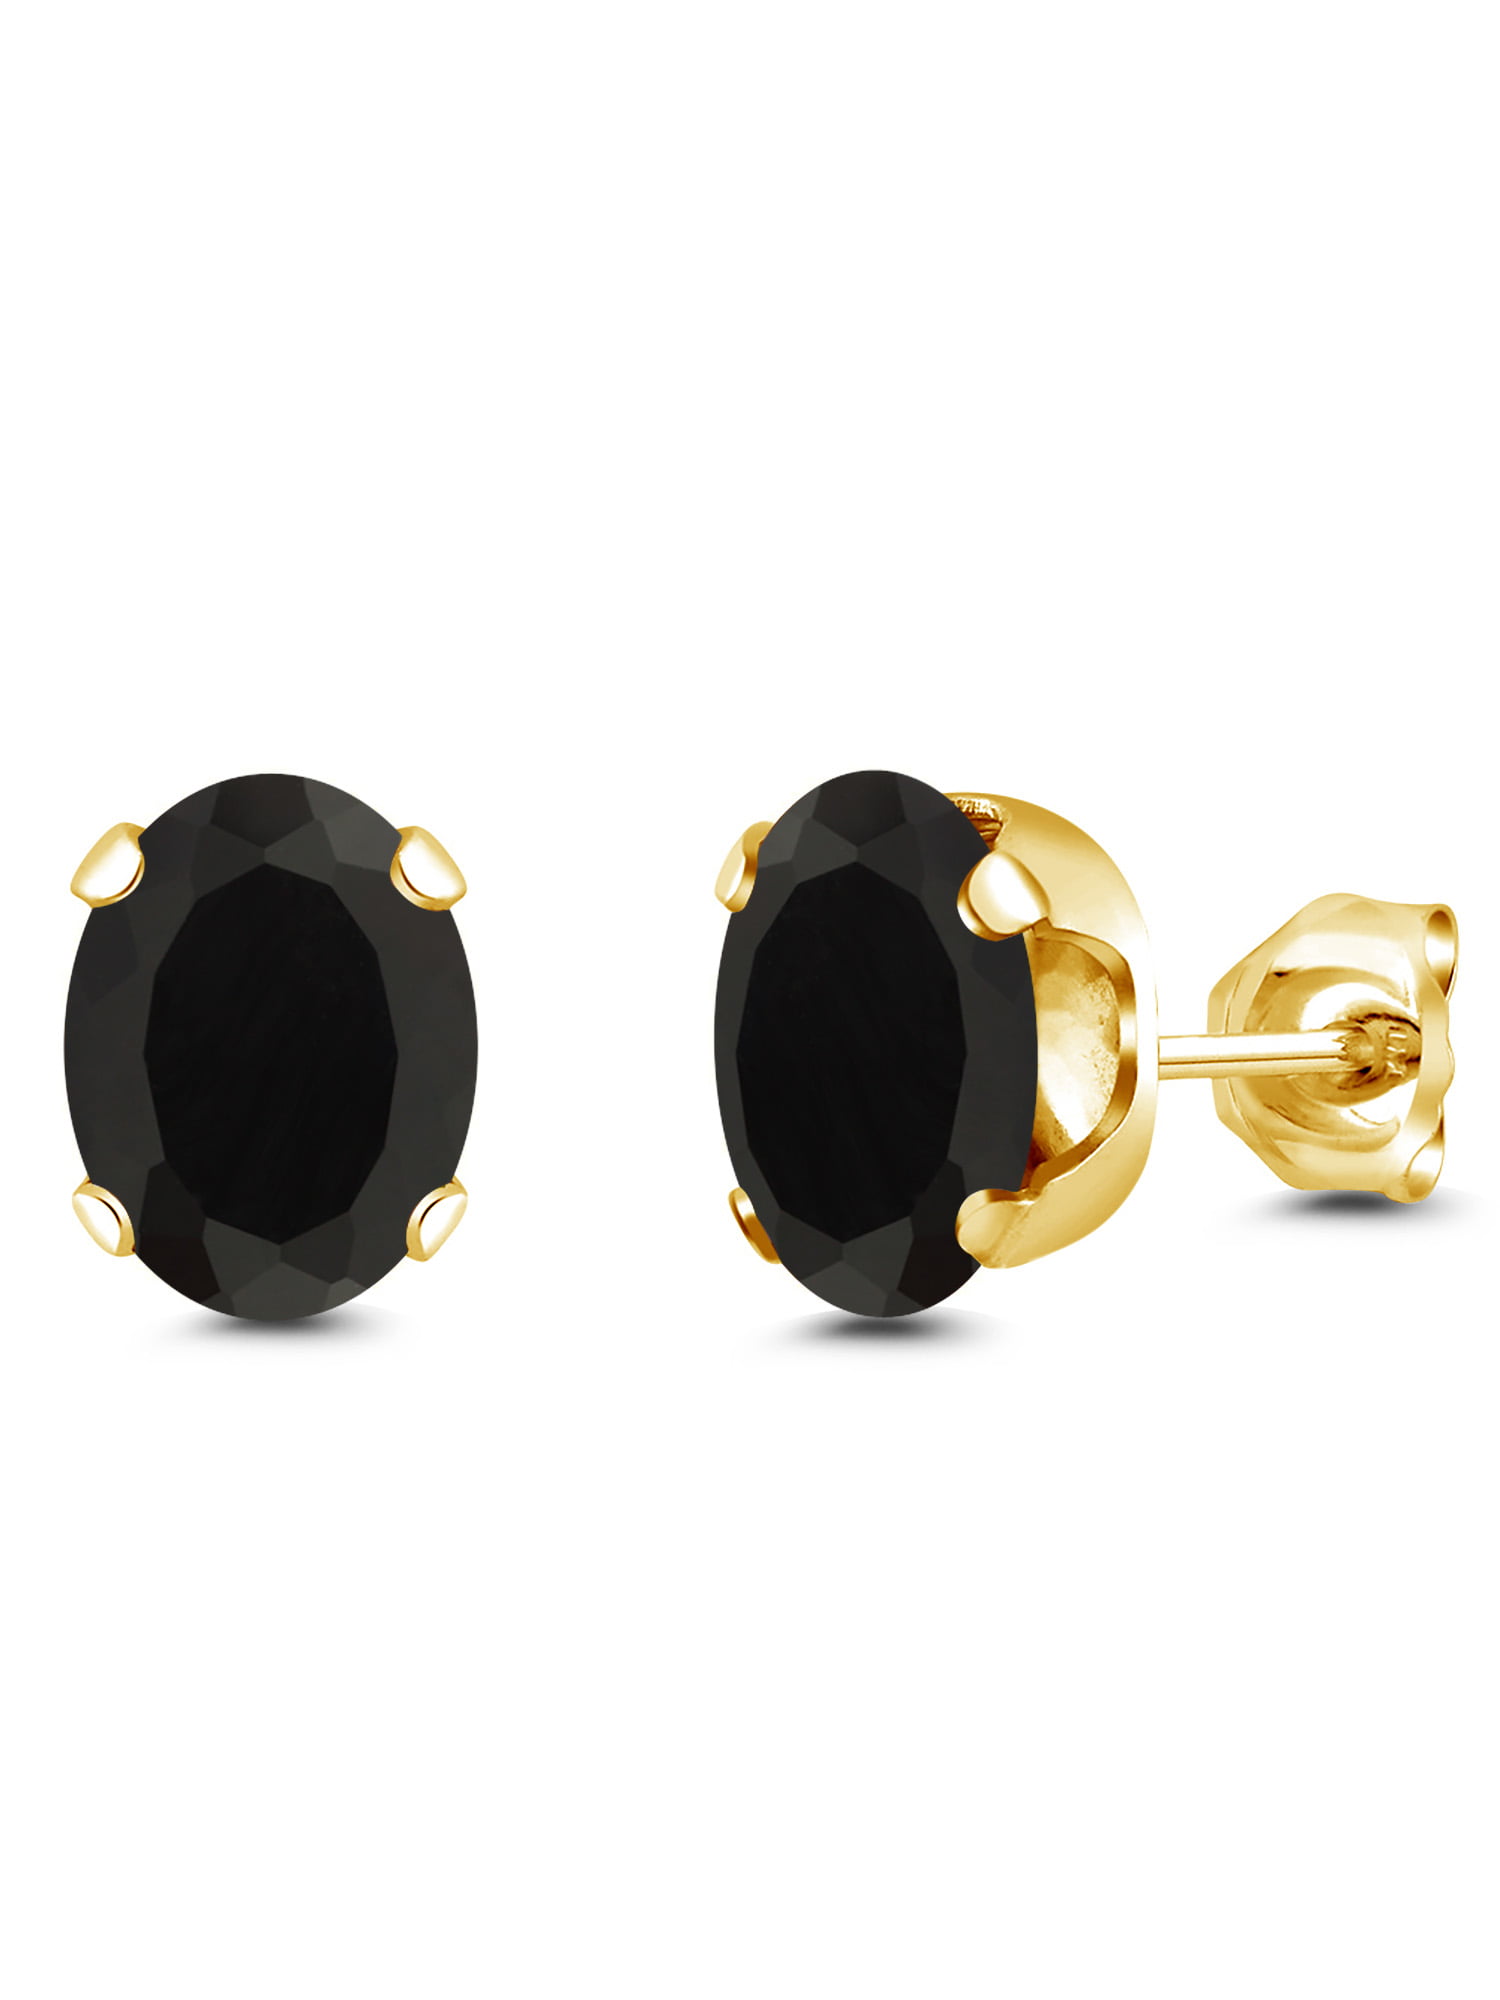 Details about   2ct Round Cut Designer Studs Natural Onyx Gem 18k Pink Gold Earrings Screw back